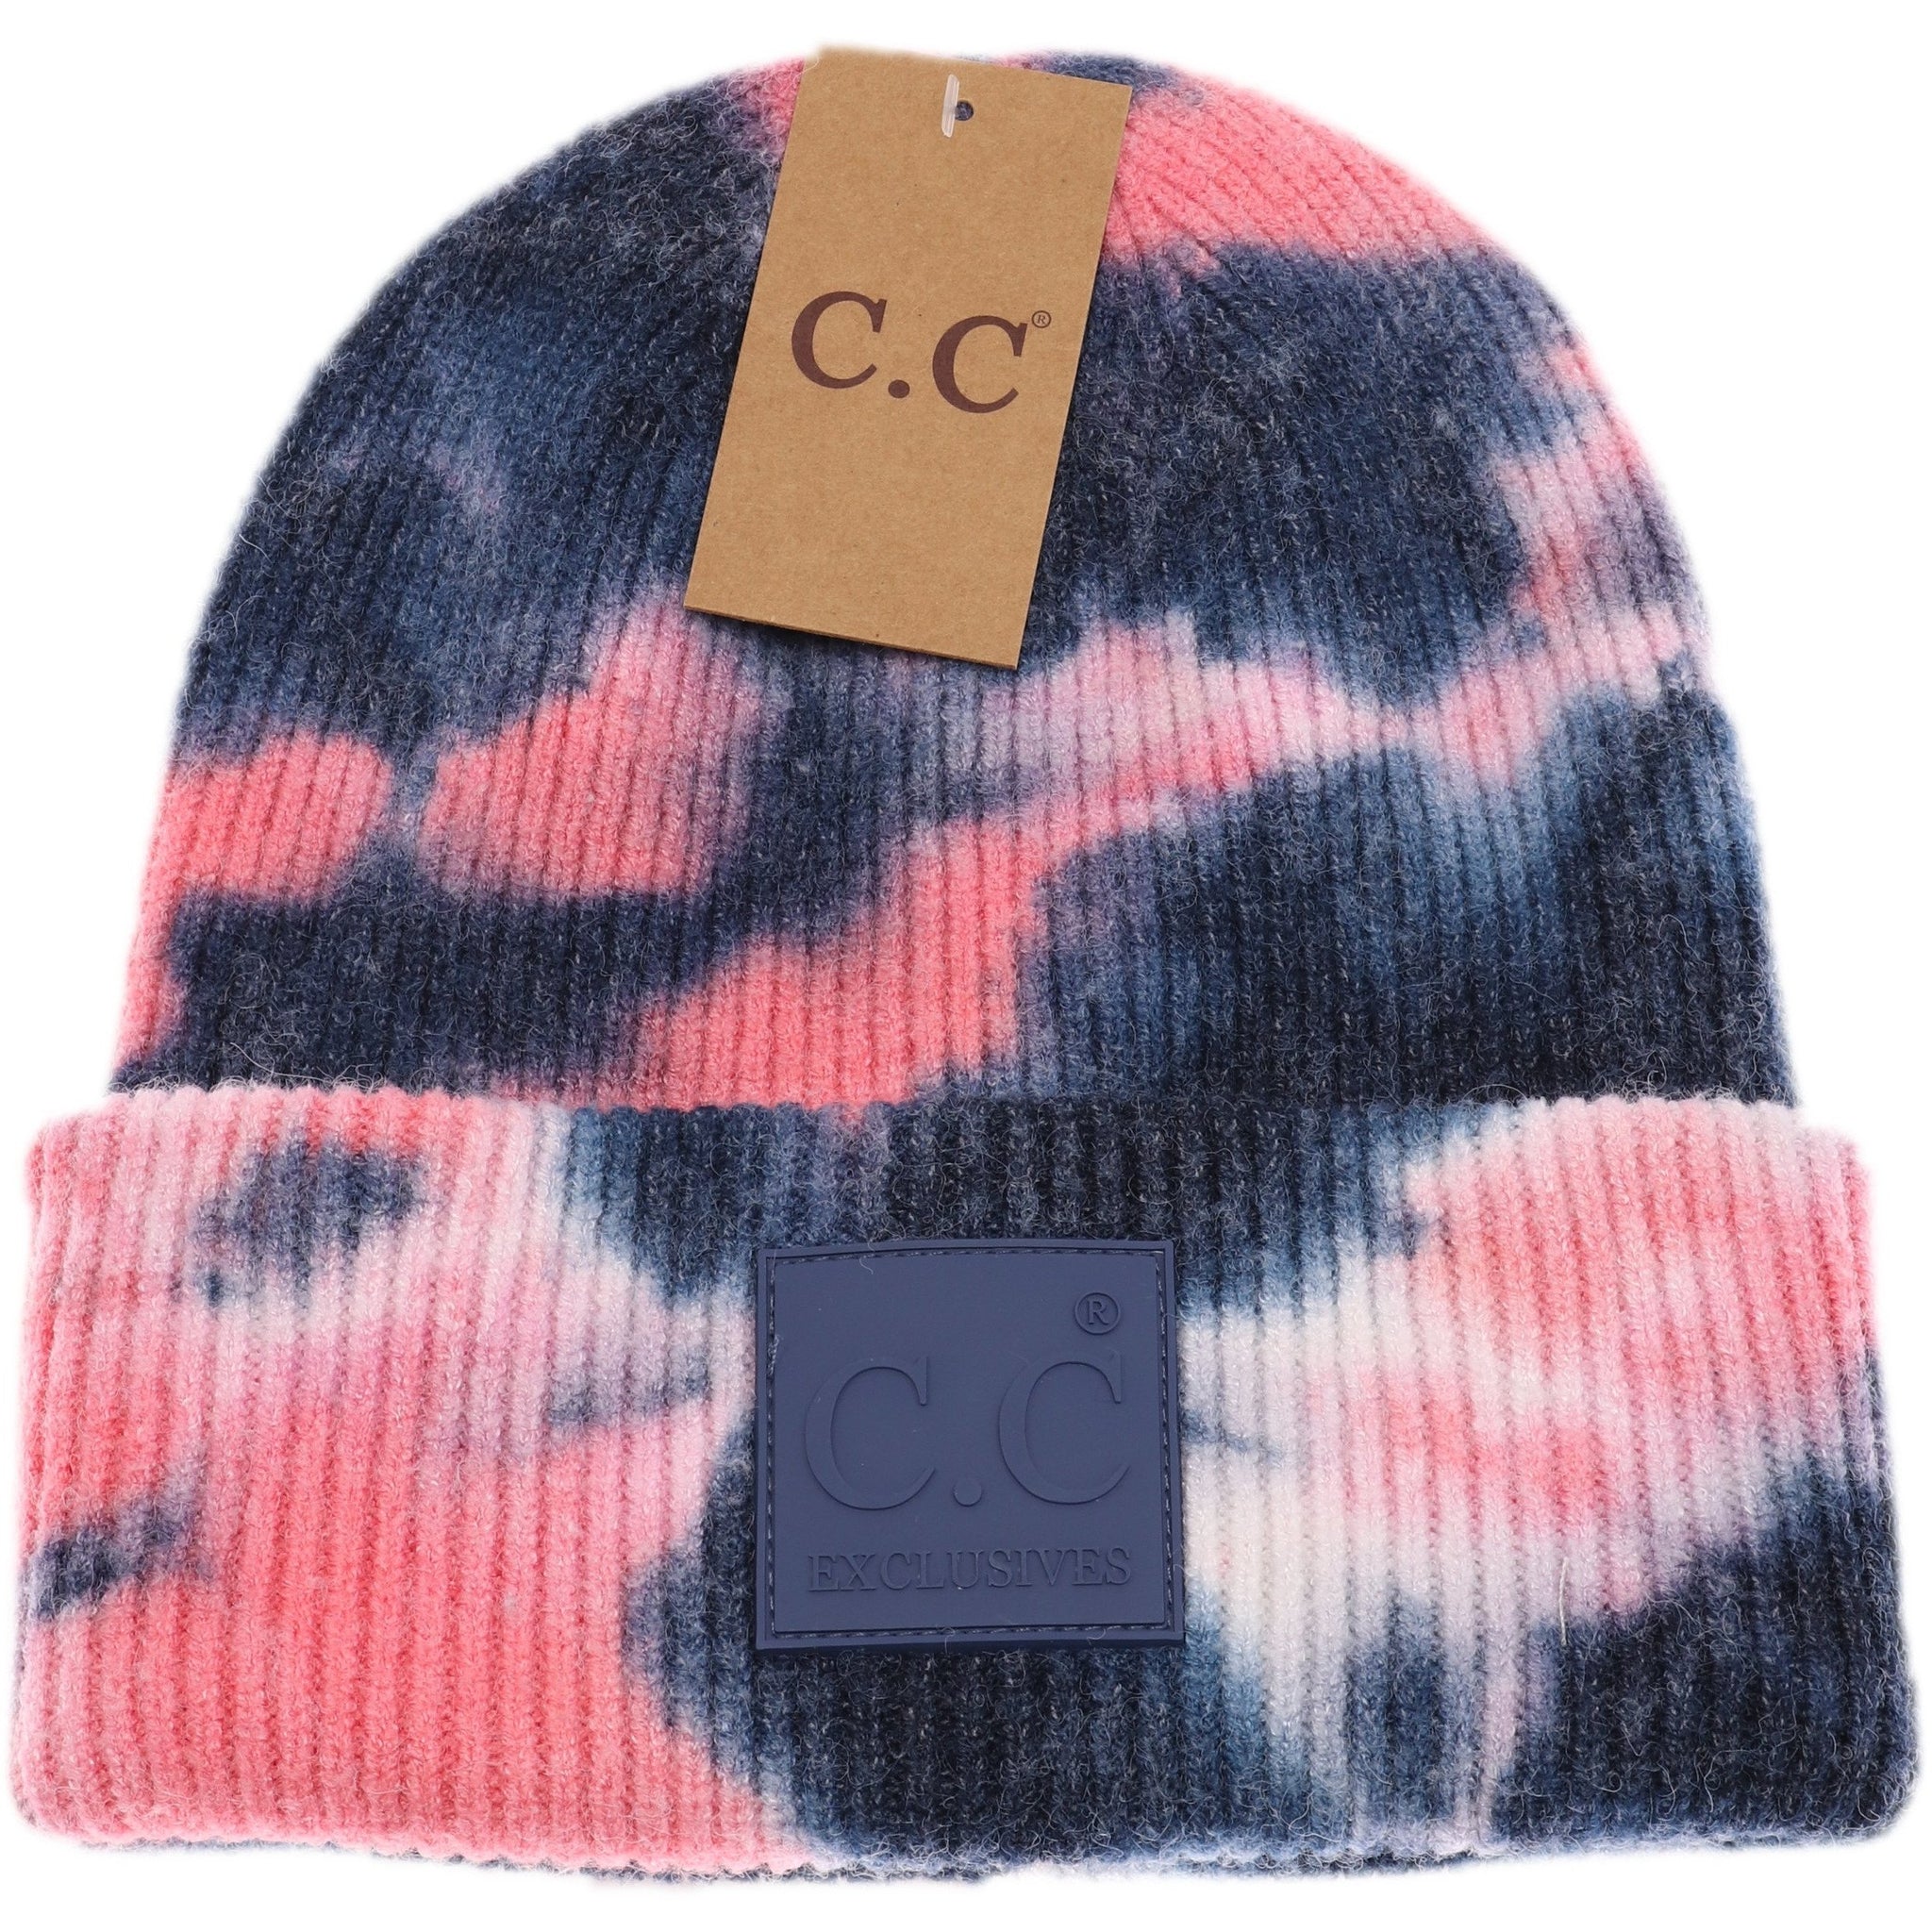 C.C Tie Dye Beanie With Rubber Label